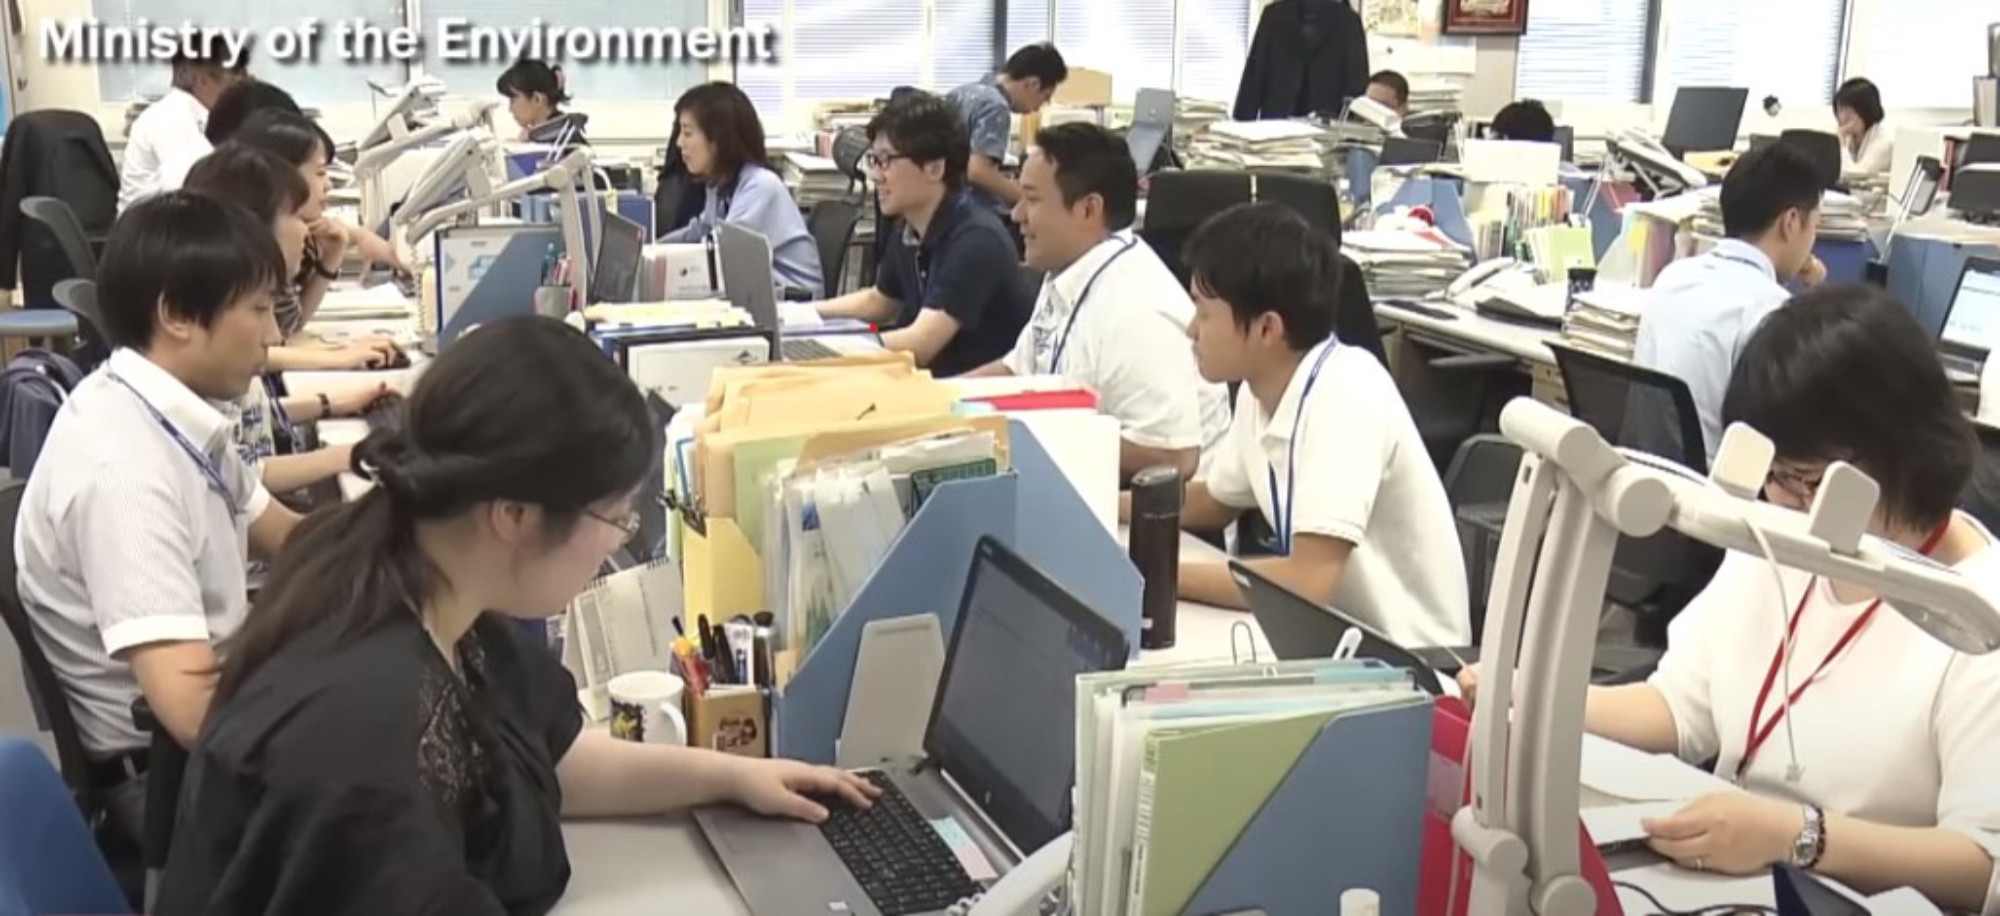 Photo of office workers in Japan's Ministry of the Environment wearing casual clothing to keep them cool.